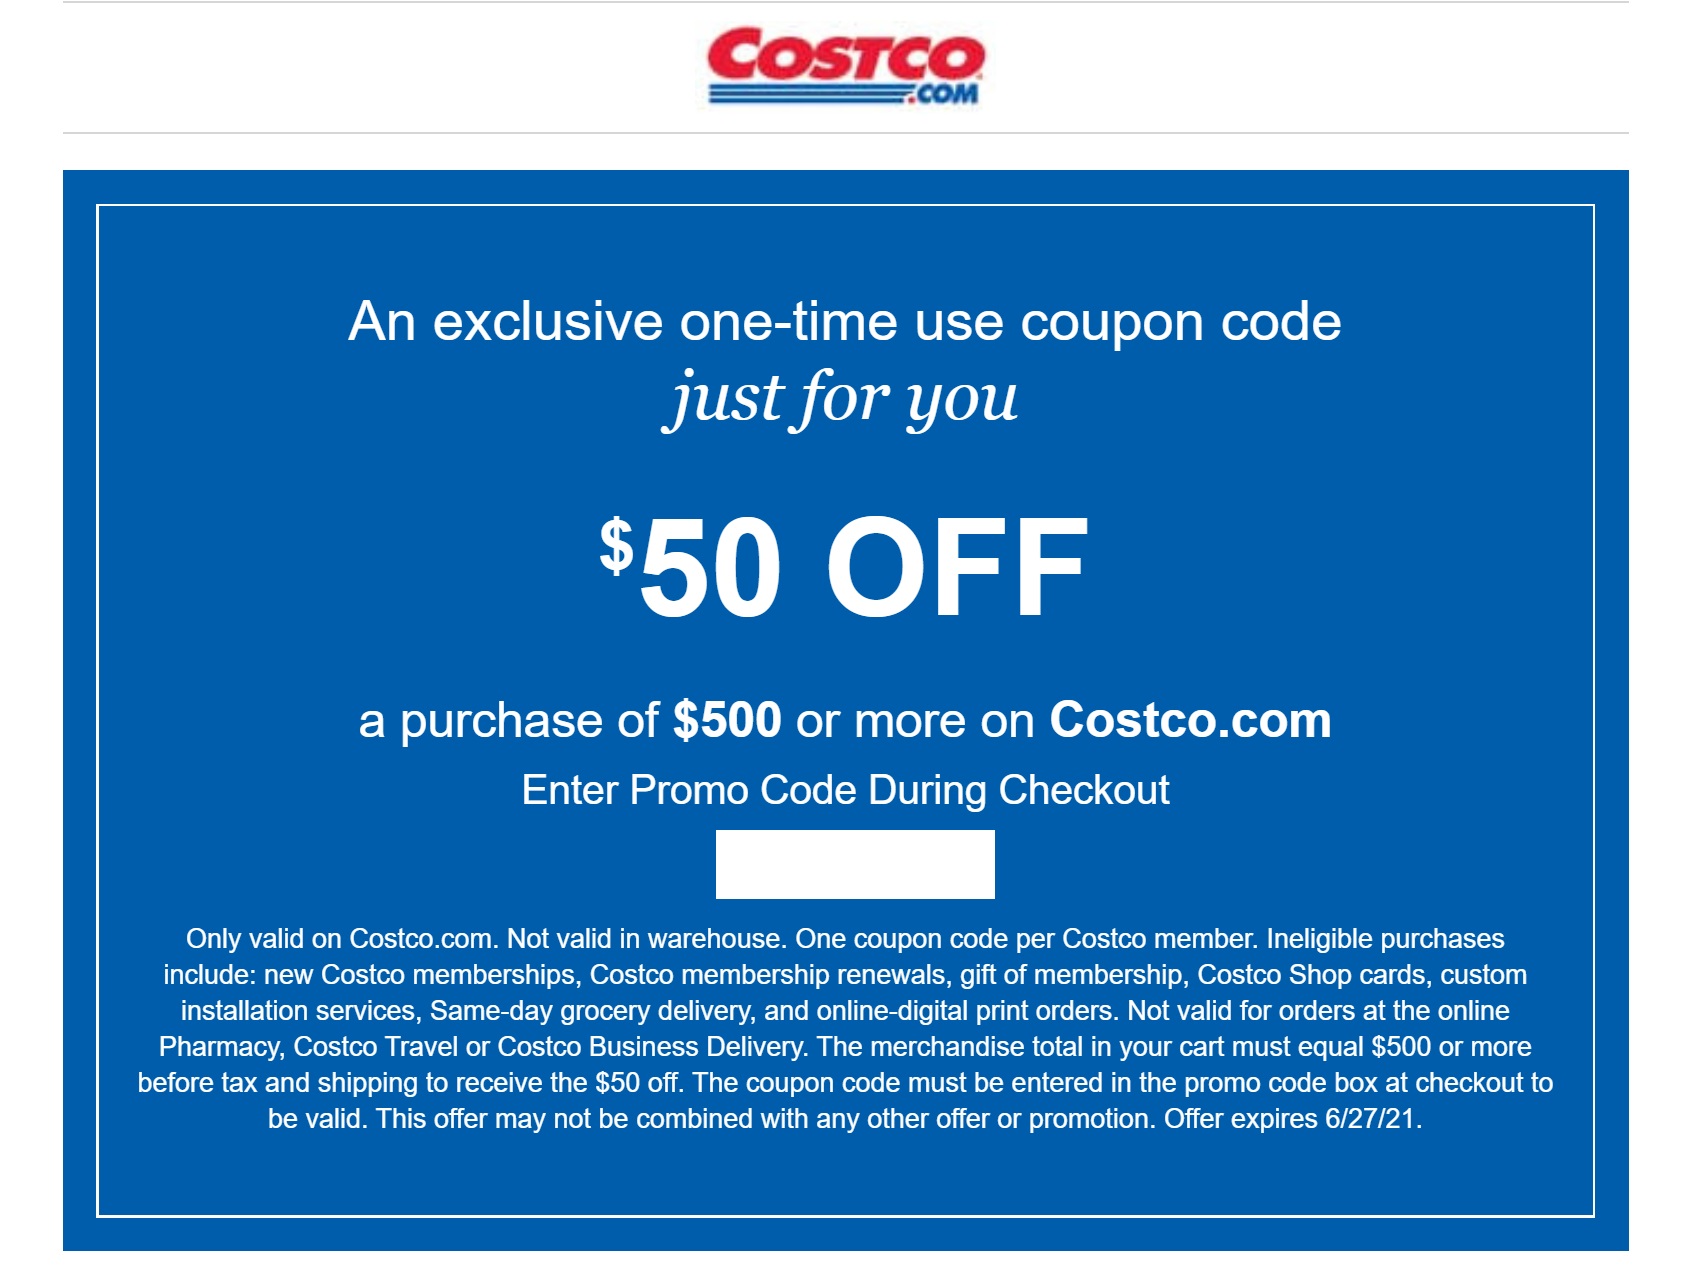 https://frequentmiler.com/wp-content/uploads/2021/06/Costco-50-off-500-coupon.jpg